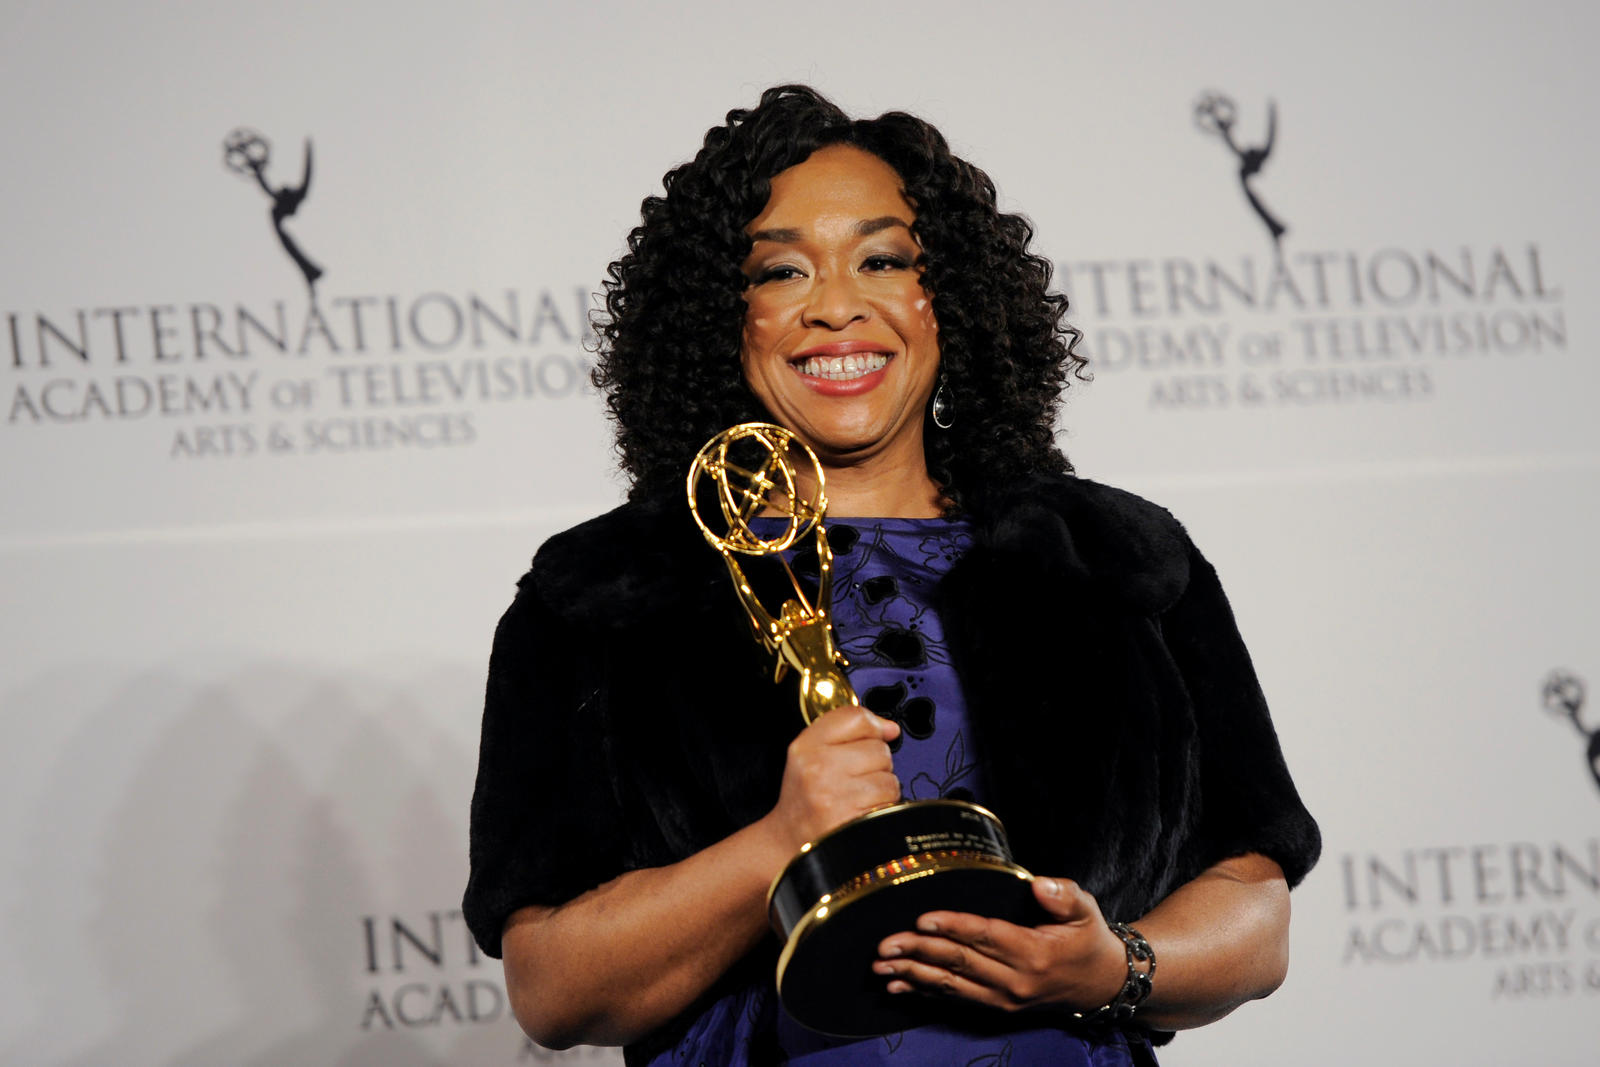 Shonda Rhimes poses in the press room with the Founders Award International Emmy in Manhattan, New York